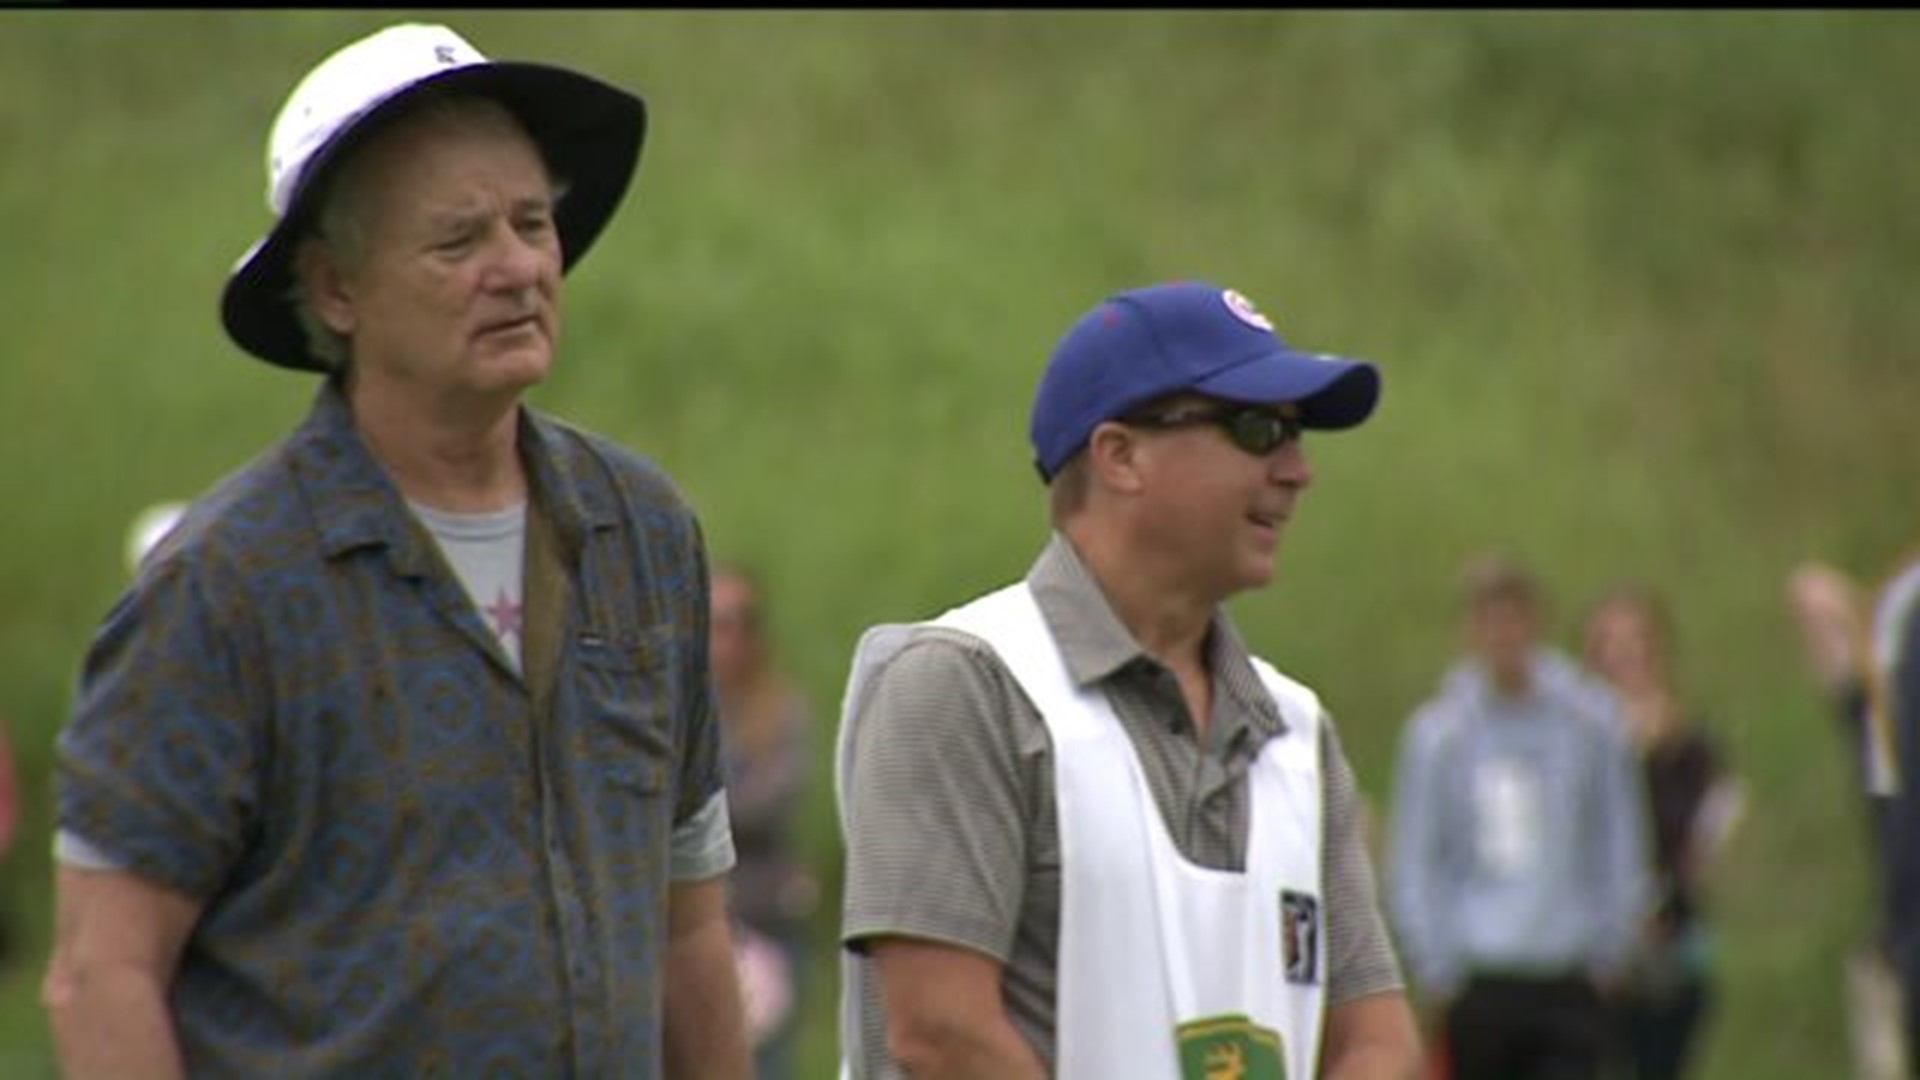 Bill Murray on the course